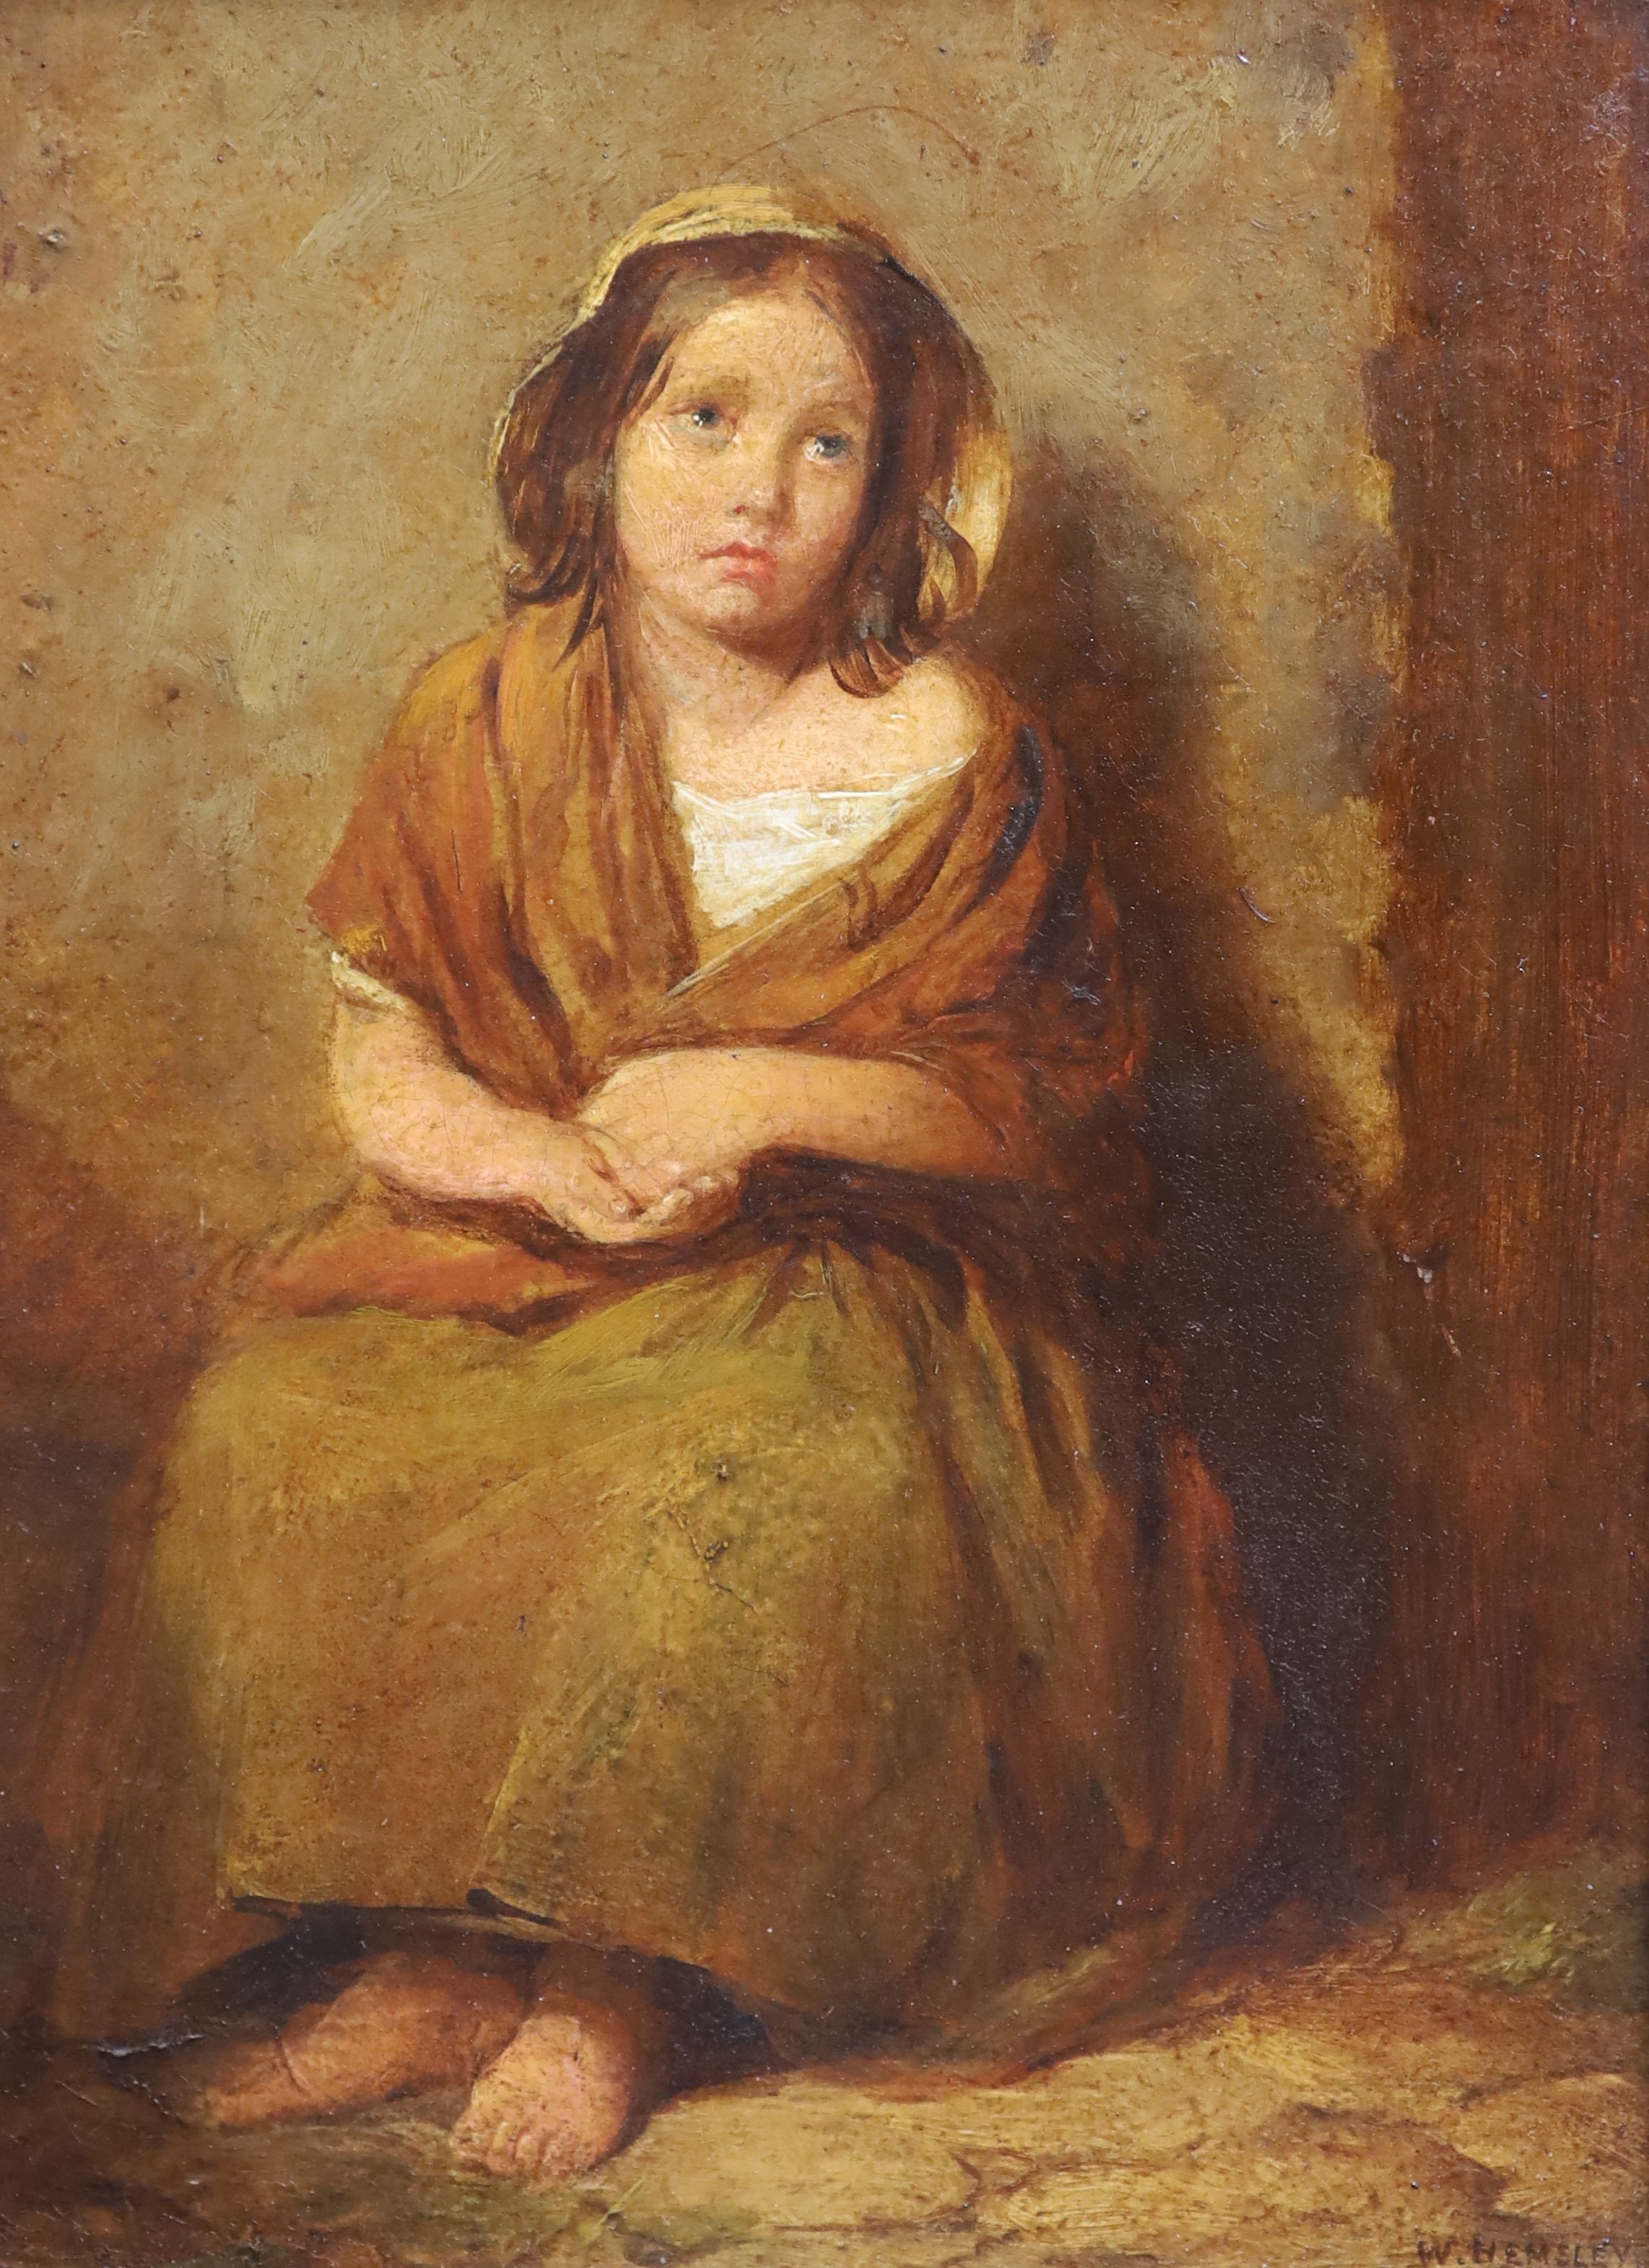 William Hemsley (1819-1893), The Orphan, Oil on board, 24 x 18cm.